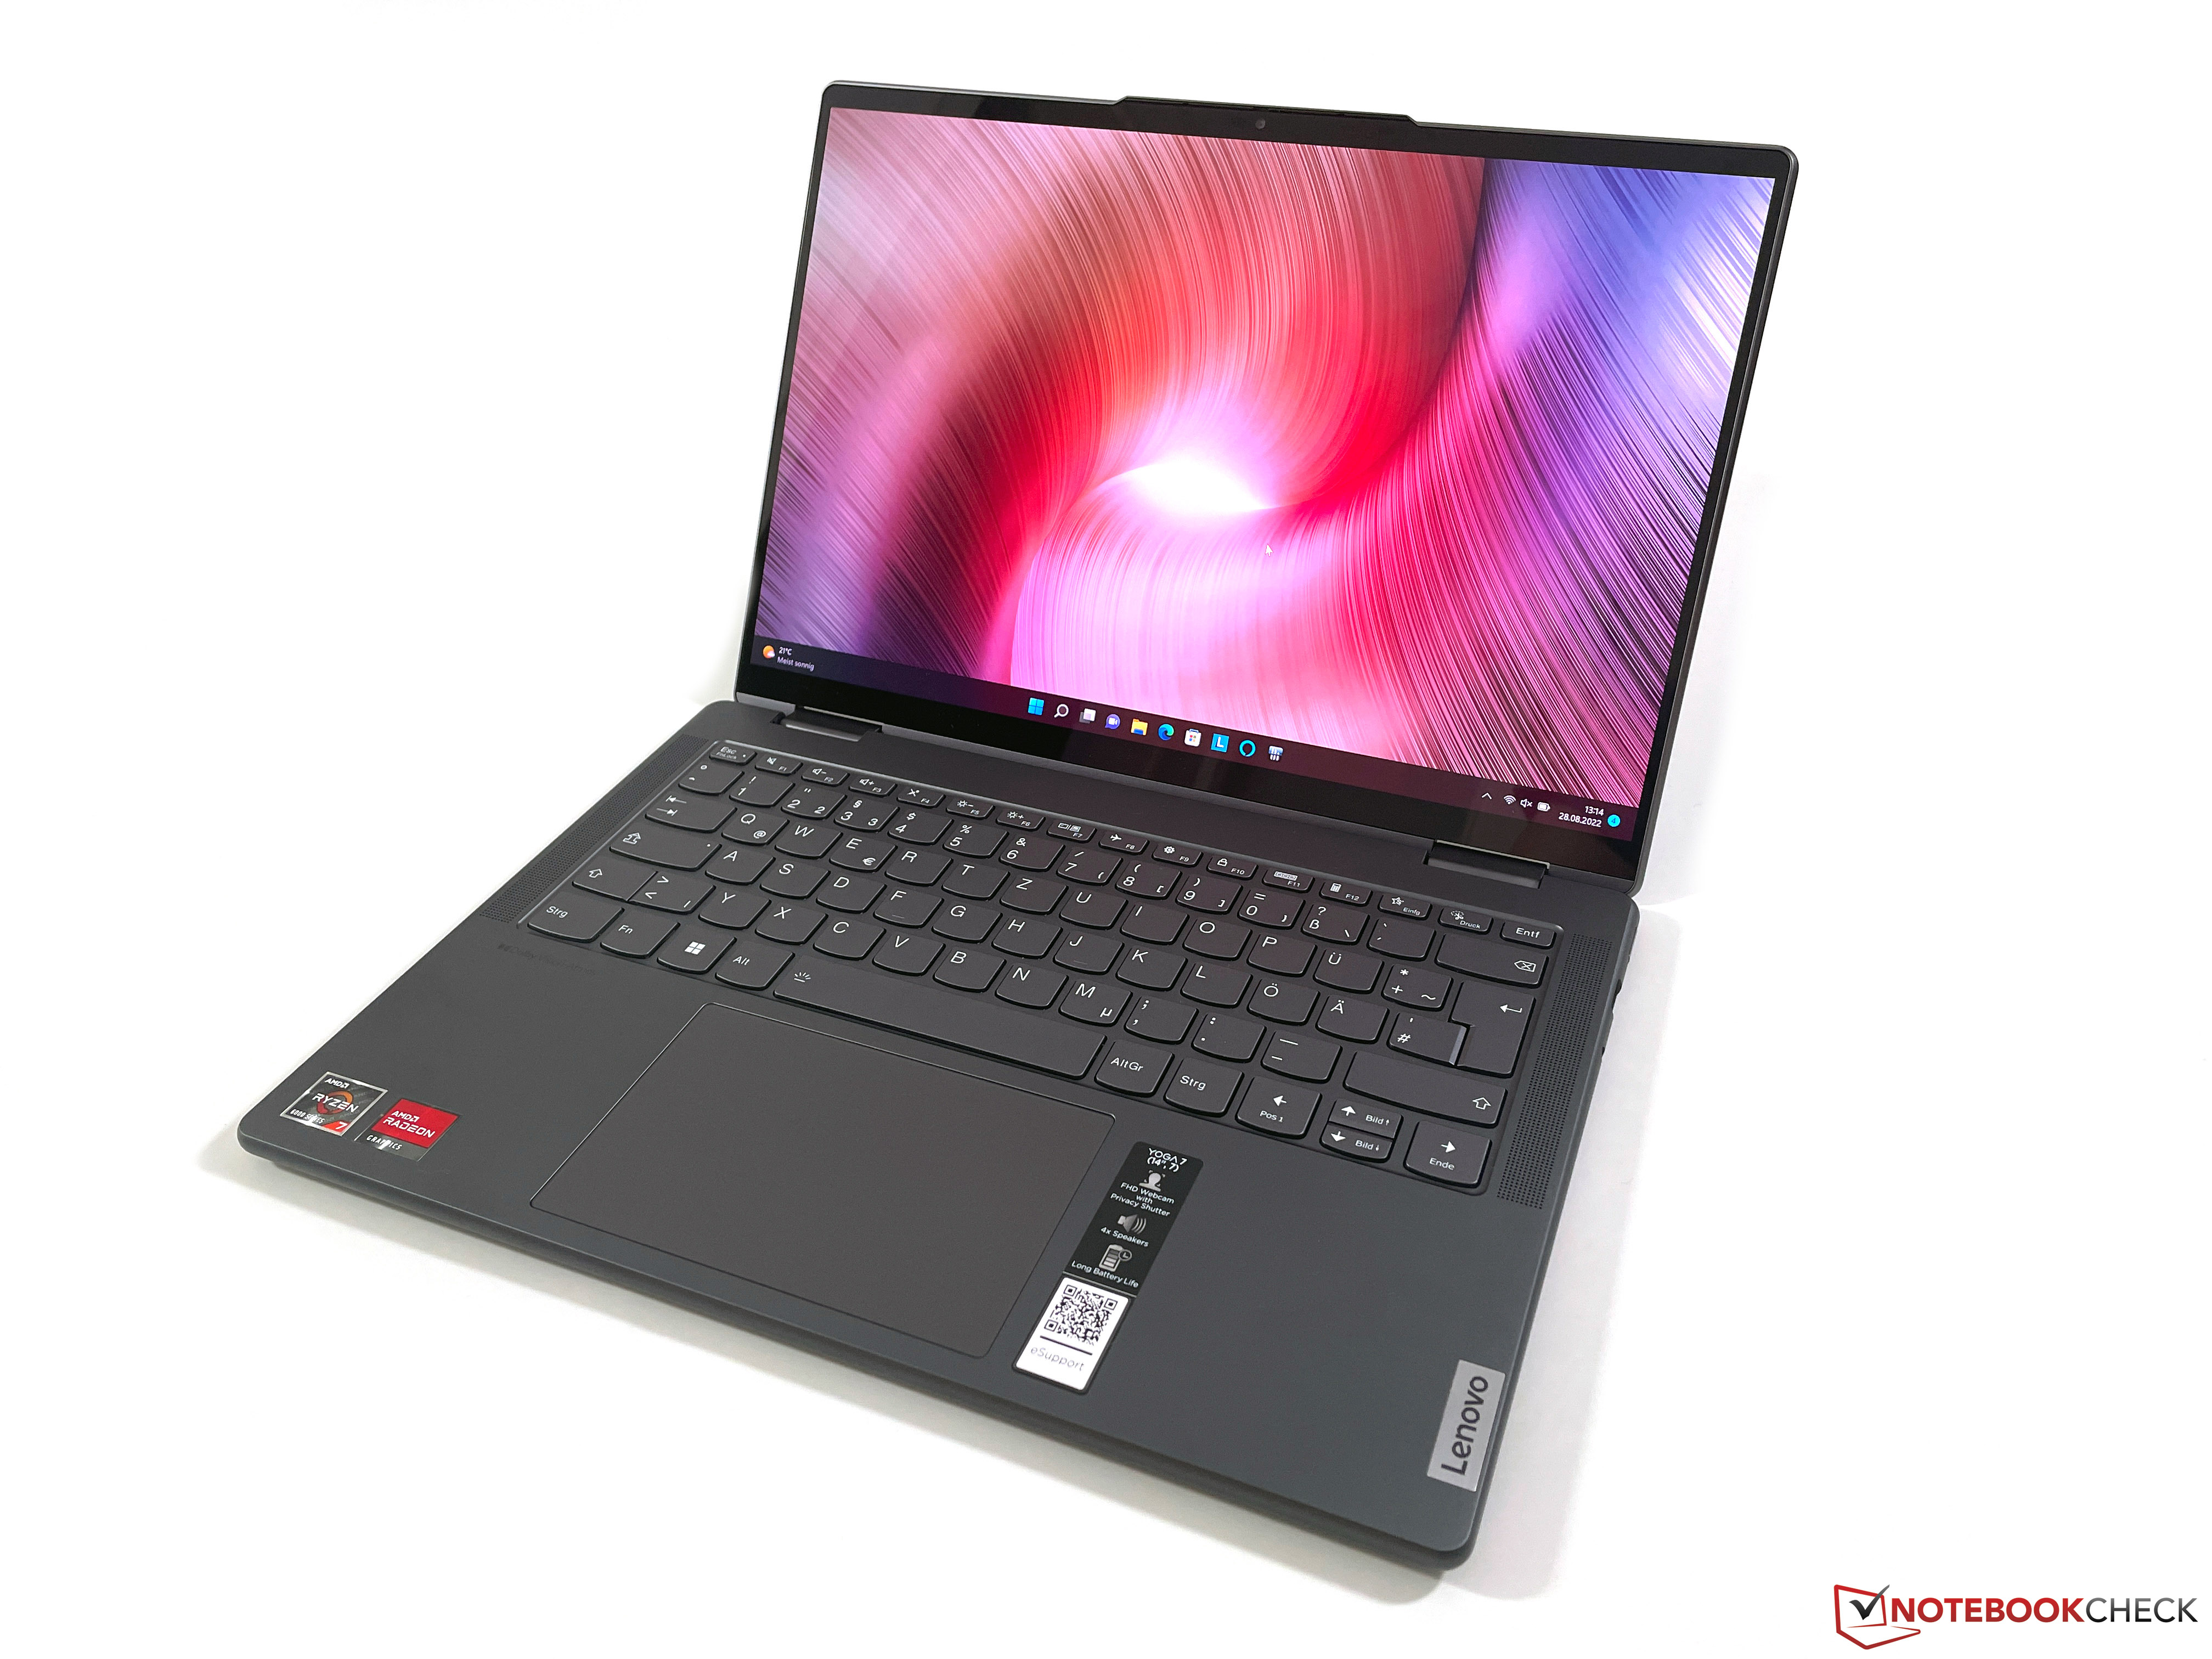 Lenovo Yoga 7 14 G7 review: Multimedia convertible shines with AMD